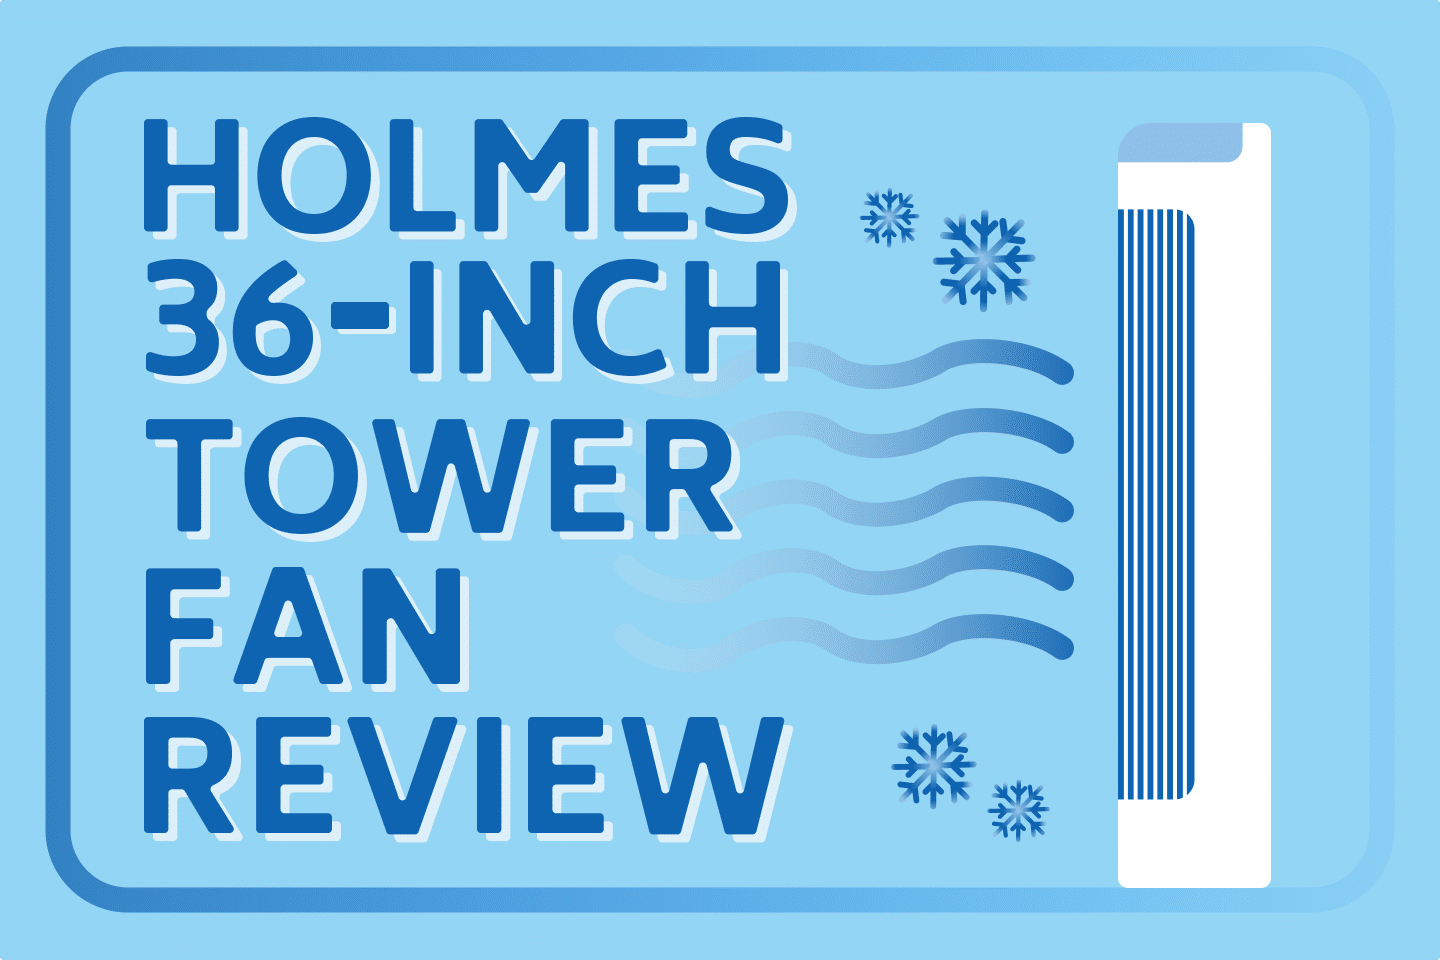 Holmes 36 Inch Tower Fan Review